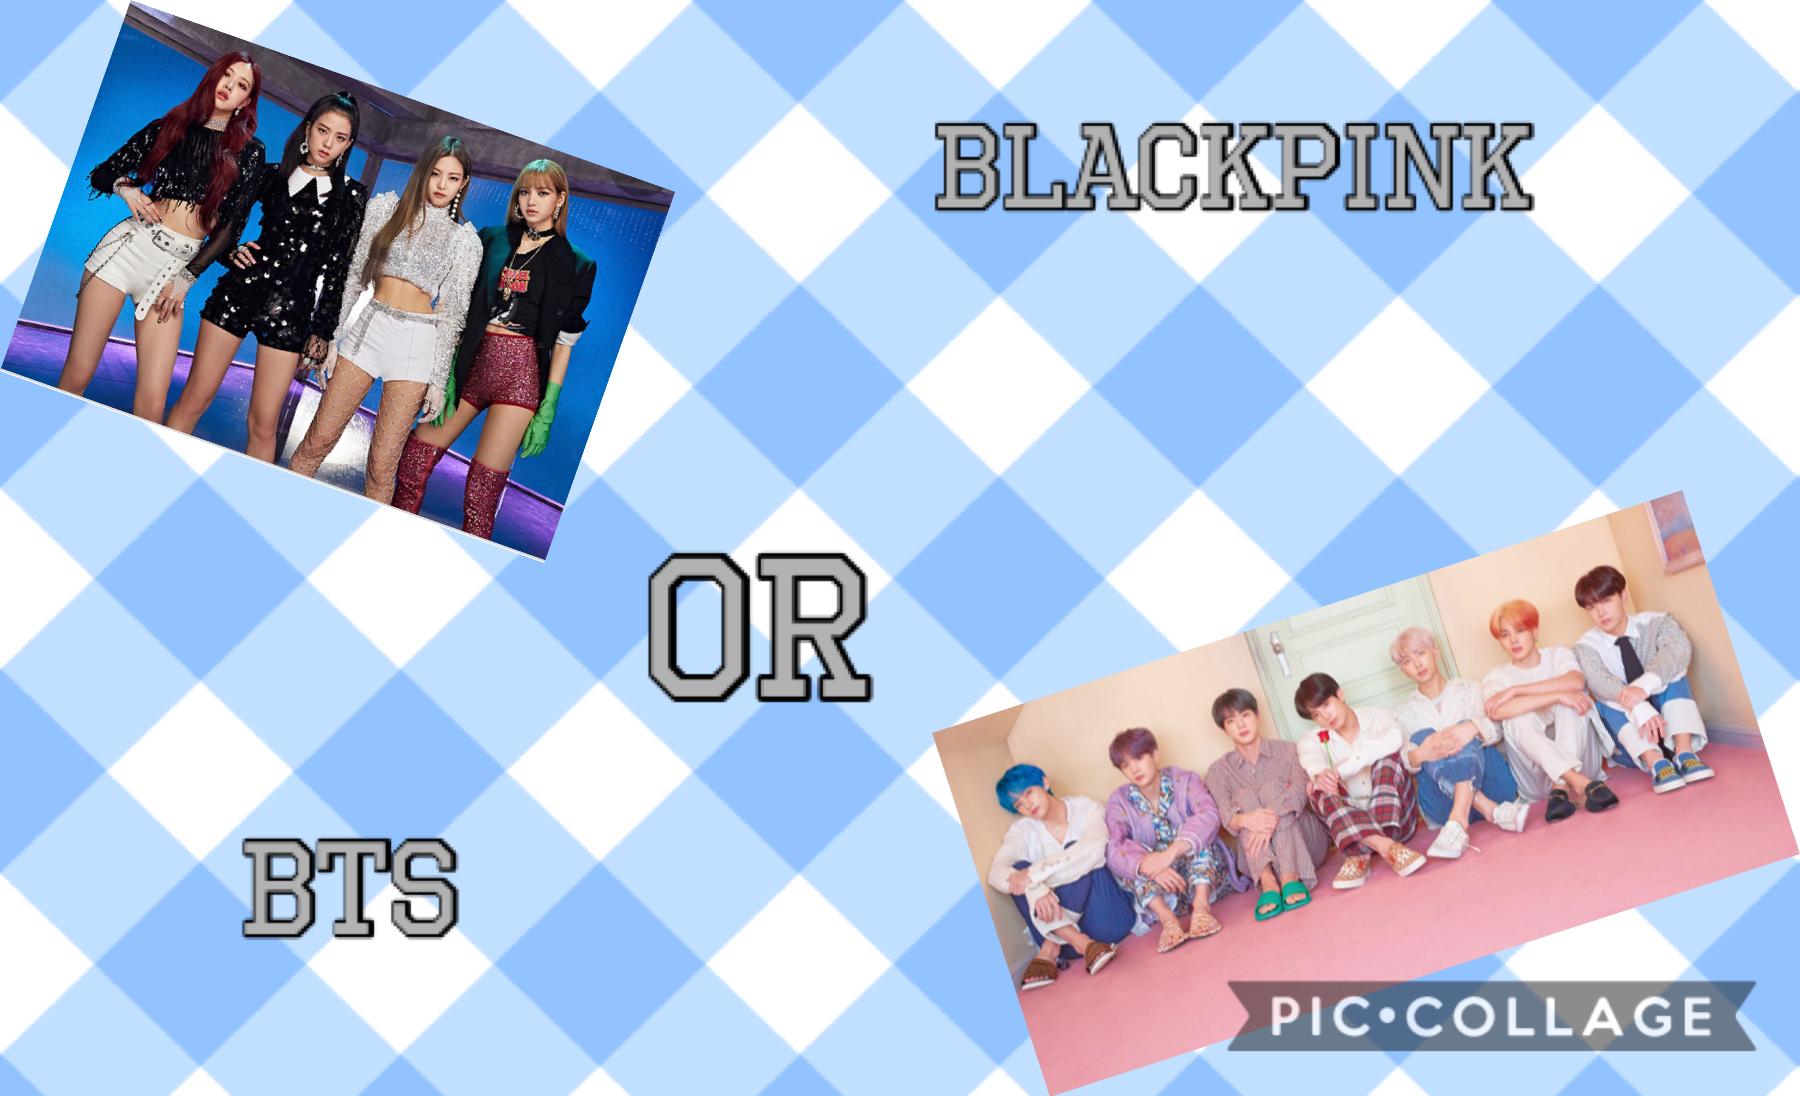 Hey for all those k-pop fans if you had to choose which one, comment which one and your fav song by them